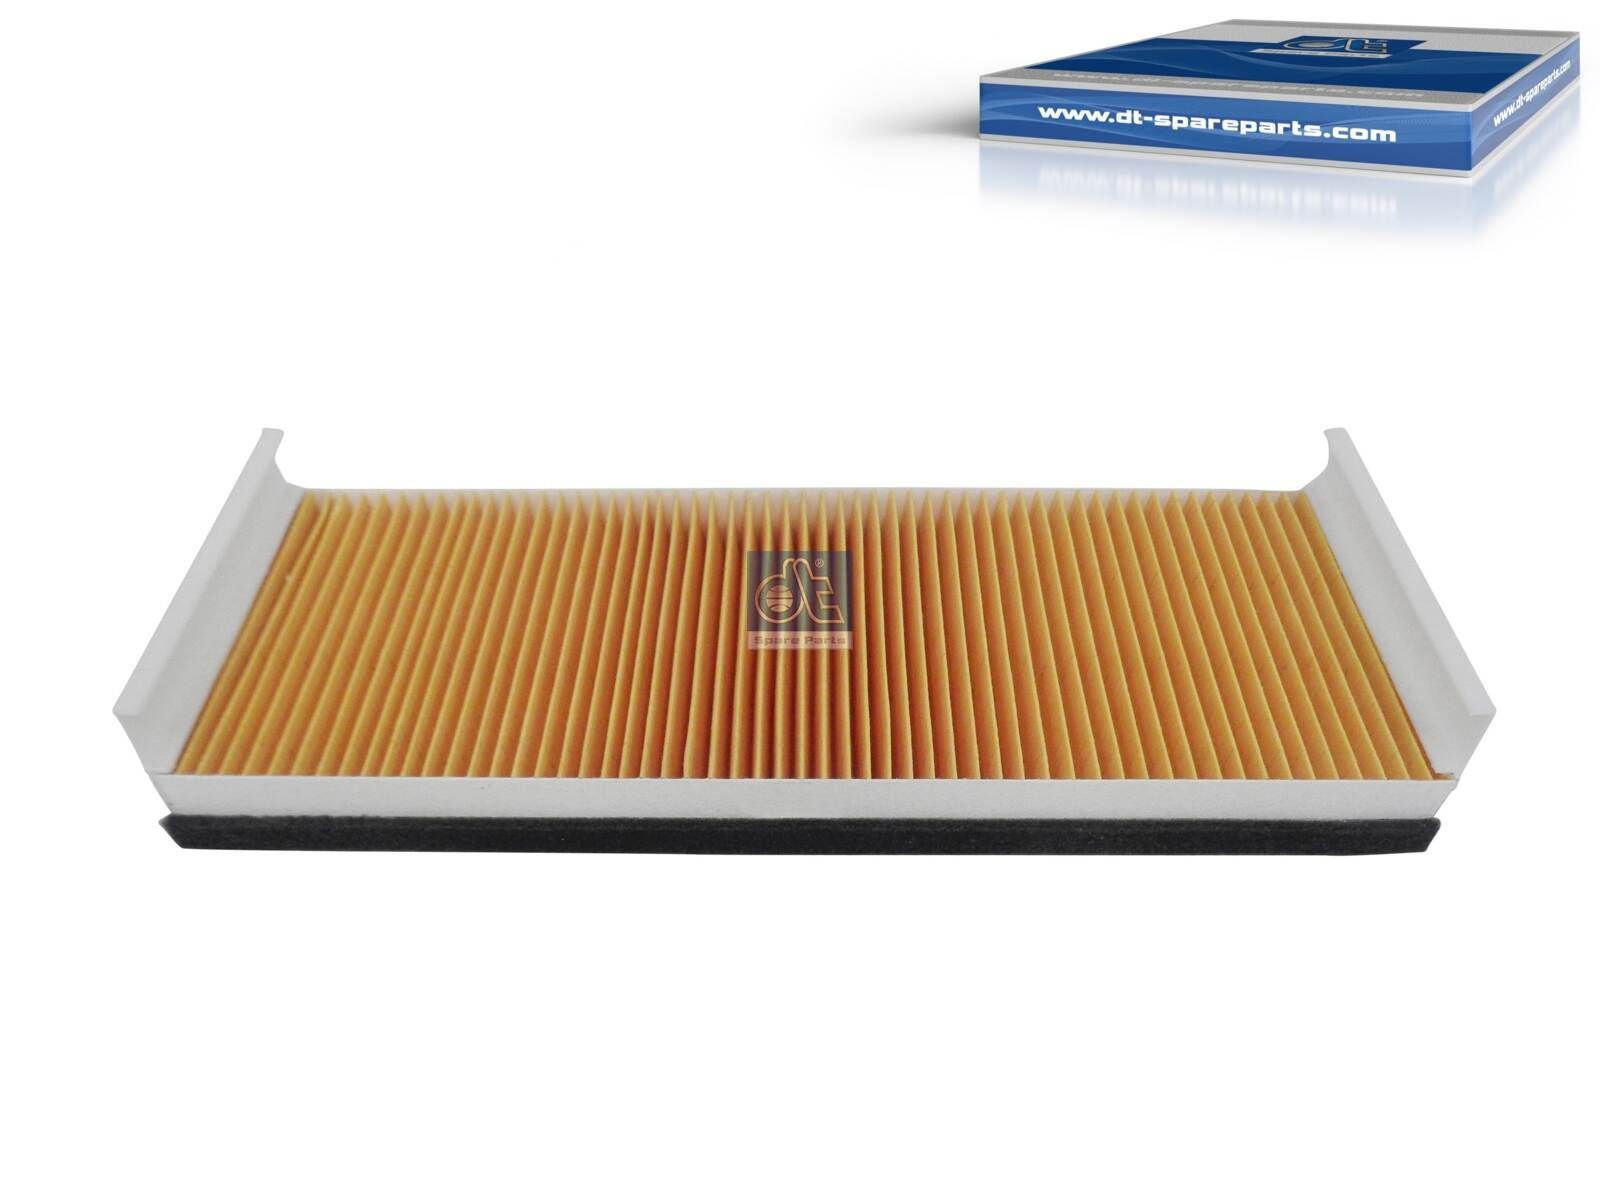 CU 4795 DT Spare Parts Particulate Filter, 465 mm x 176 mm x 70 mm Width: 176mm, Height: 70mm, Length: 465mm Cabin filter 3.82004 buy